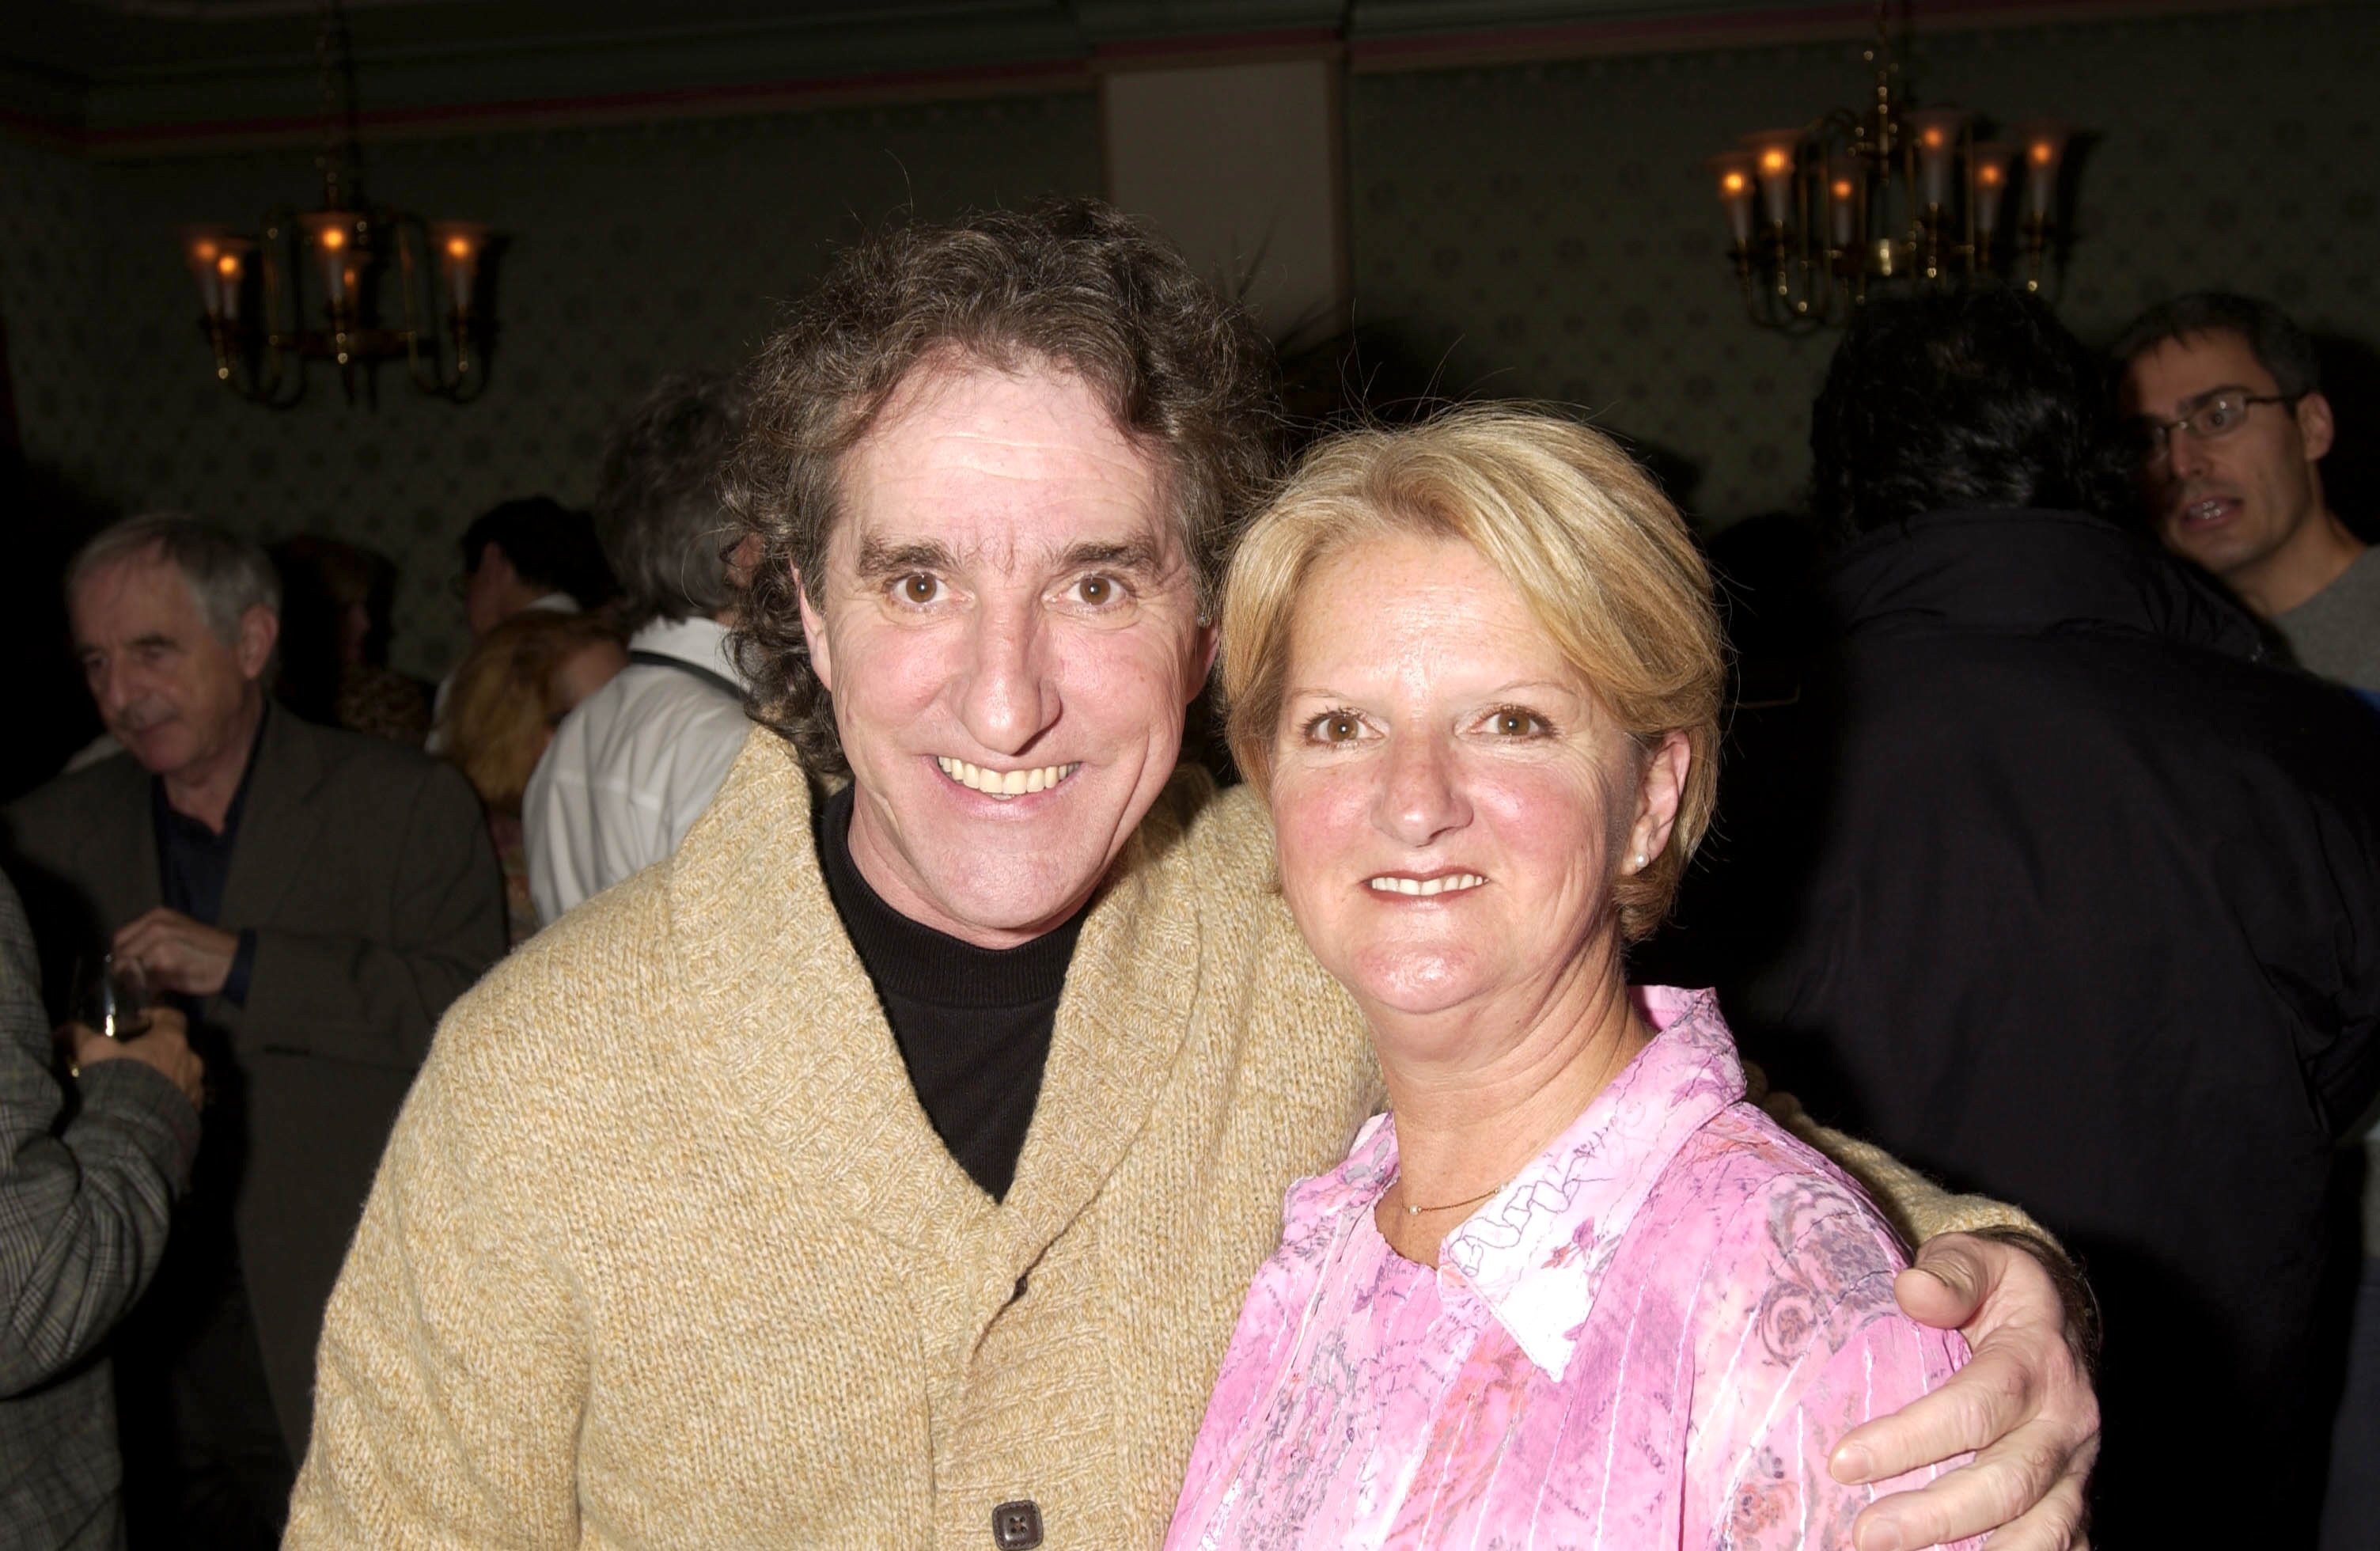 Jacques and Louise Dion at the launch of their mother Therese Dion’s autobiography in Montreal, Canada, on November 7, 2006. | Source: Getty Images